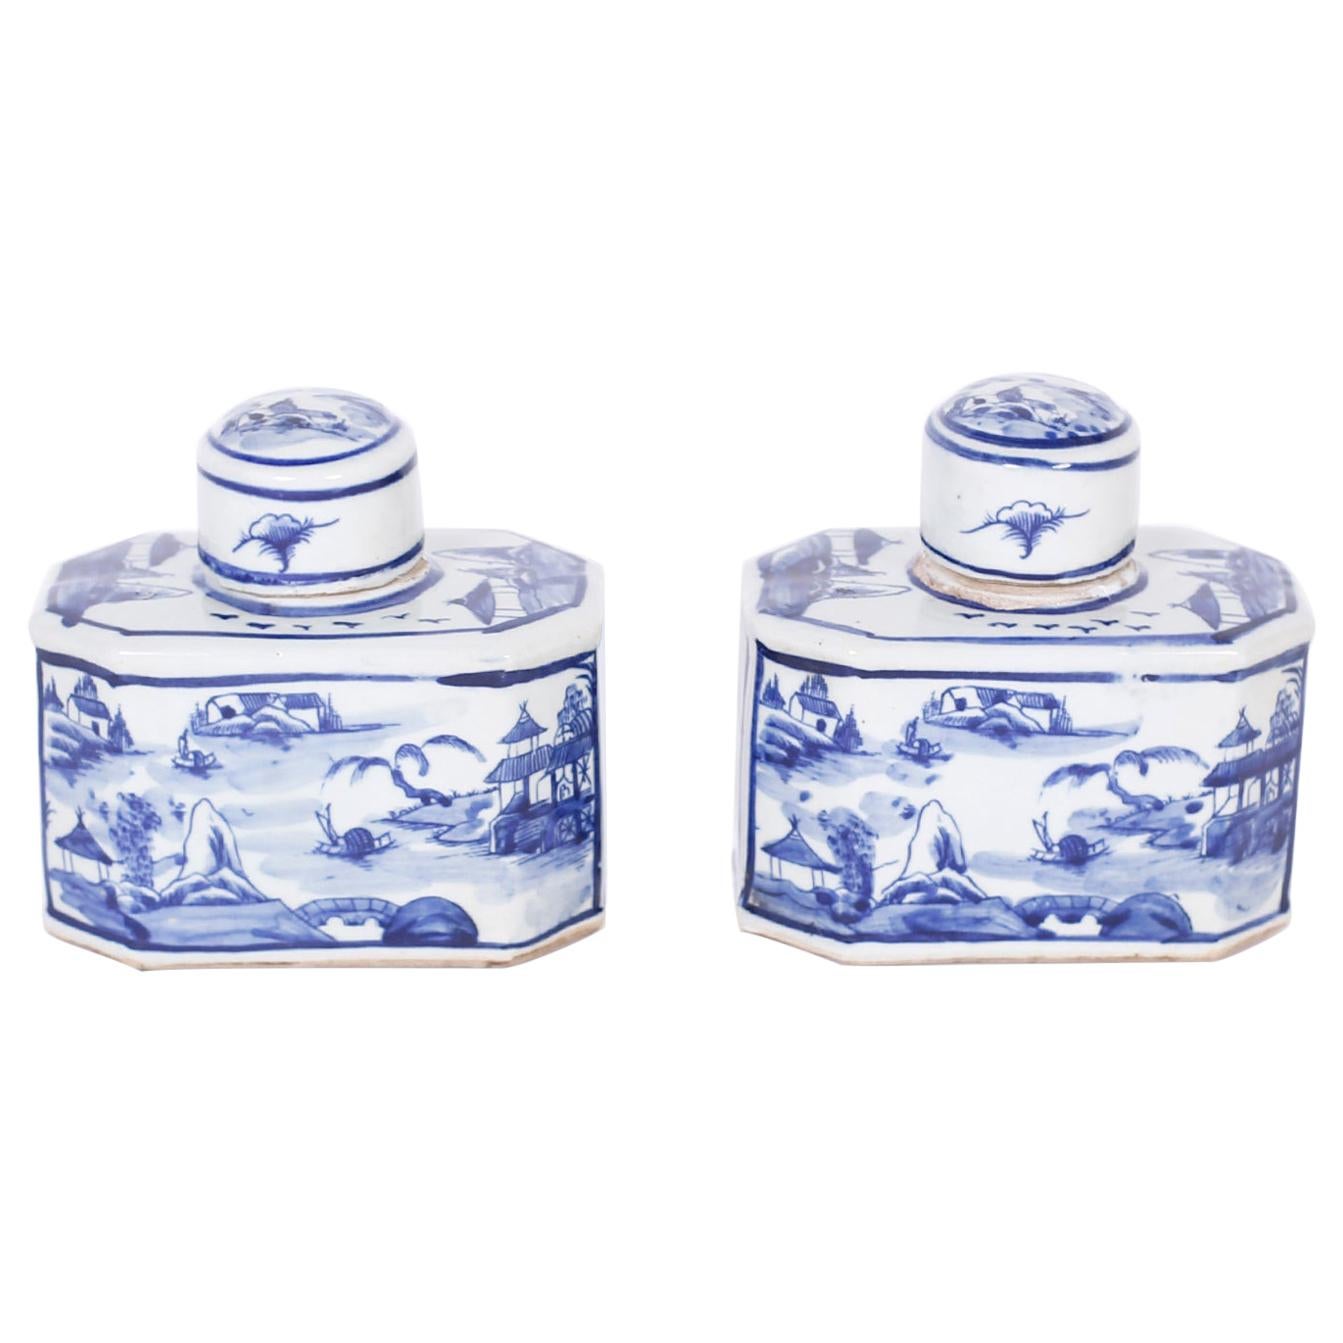 Pair of Chinese Blue and White Porcelain Tea Caddies with Landscapes